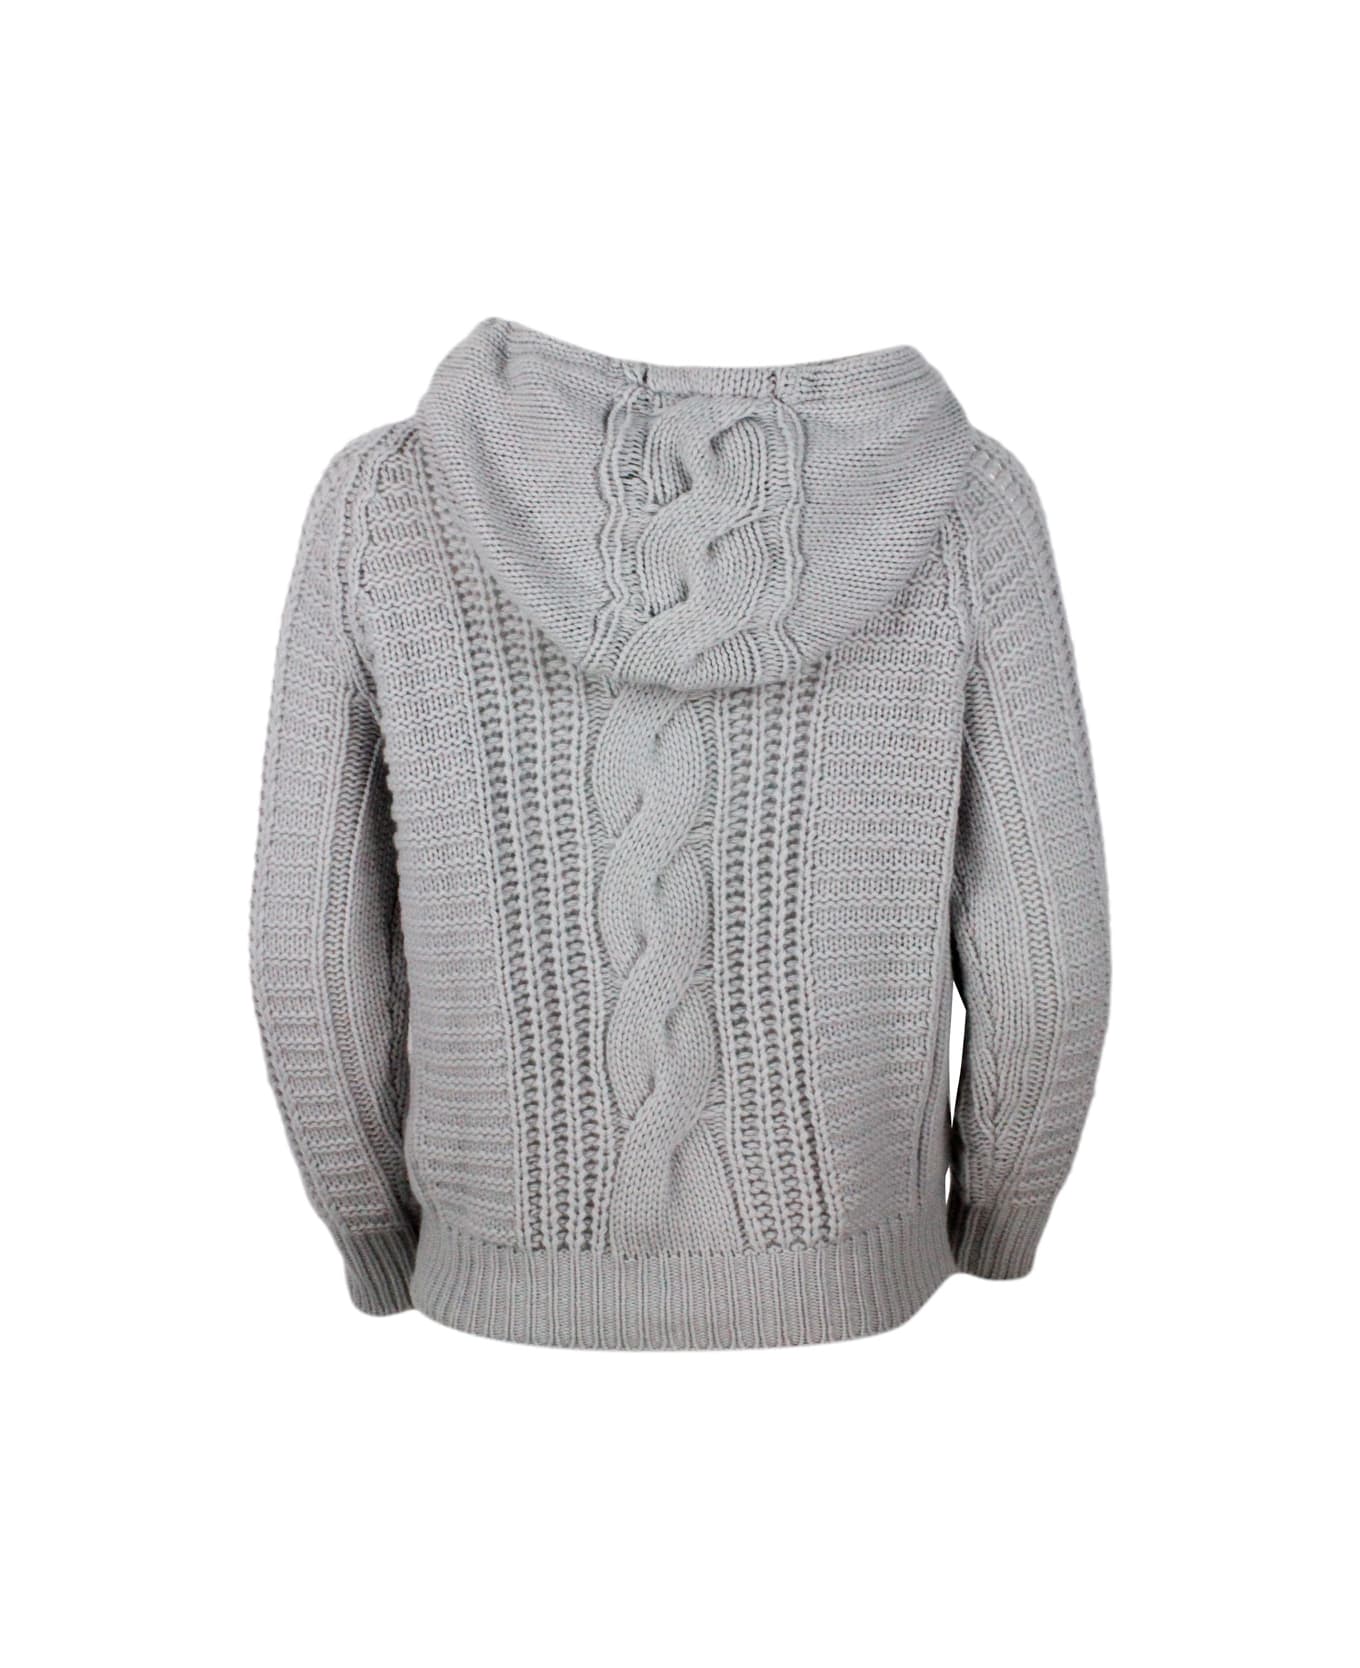 Lorena Antoniazzi Crewneck Sweater With Hood With Drawstring Made Of 100% Cashmere With Cable Knit - Grey